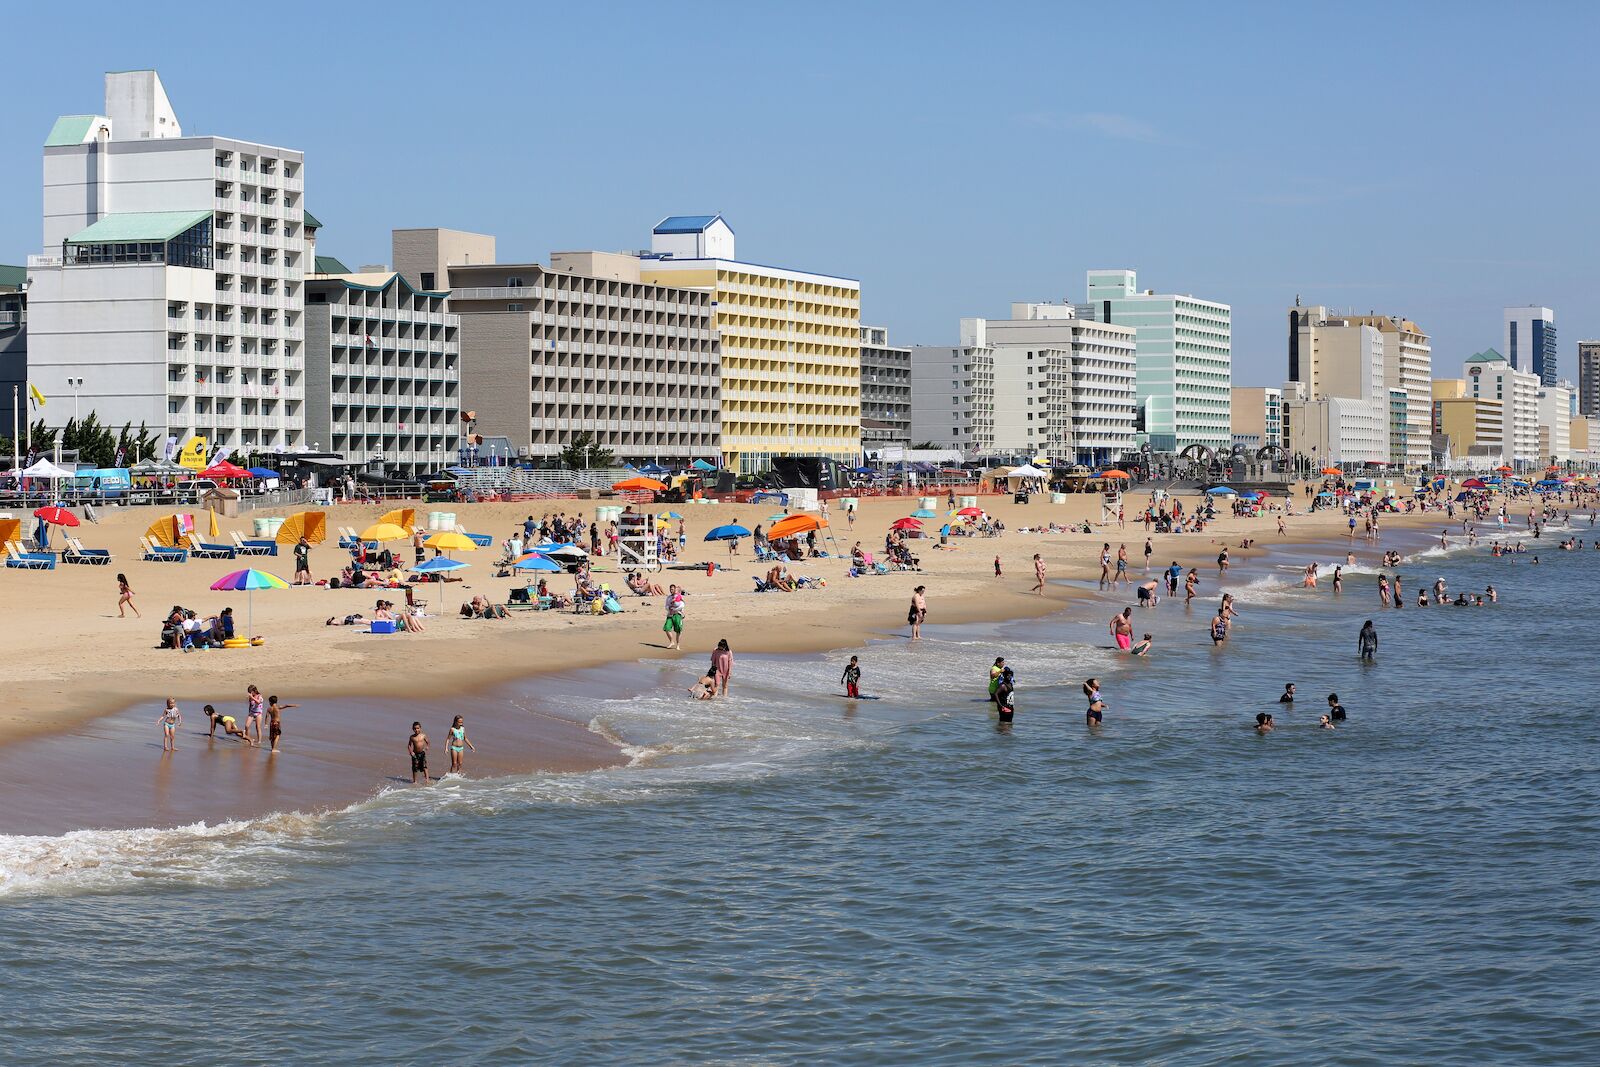 Virginia Beach, Virginia USA: June 2, 2018:  On a beautiful summer day tourist who visit the resort city of Virginia Beach have fun  in the water and on the sand.